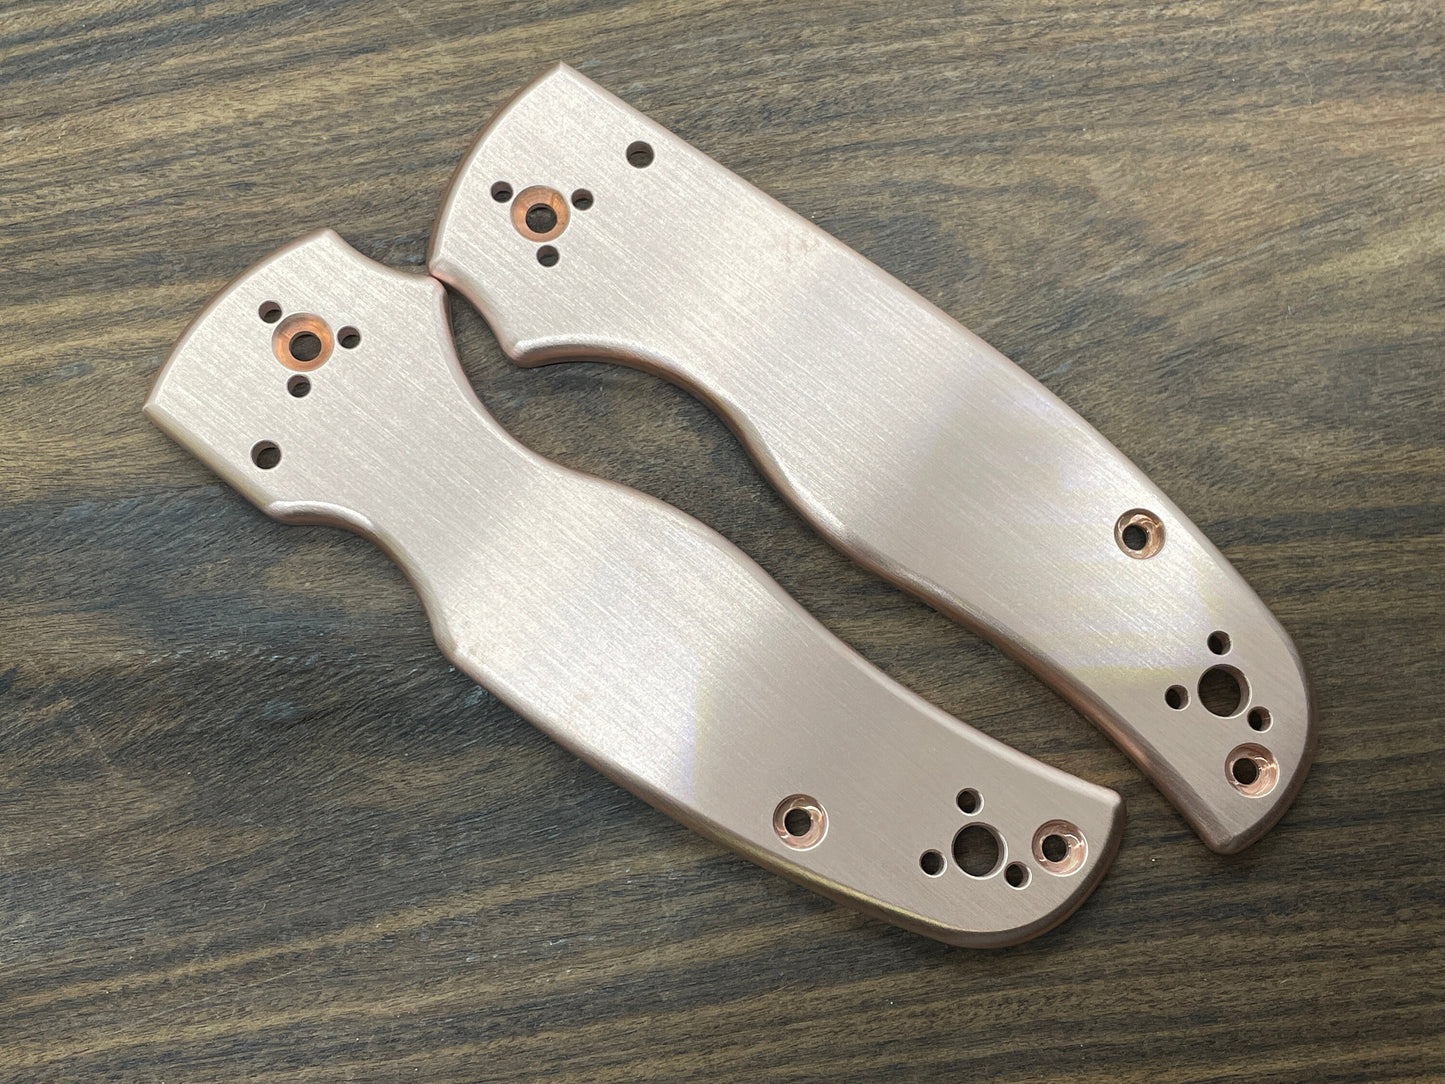 Brushed Copper Scales for SHAMAN Spyderco